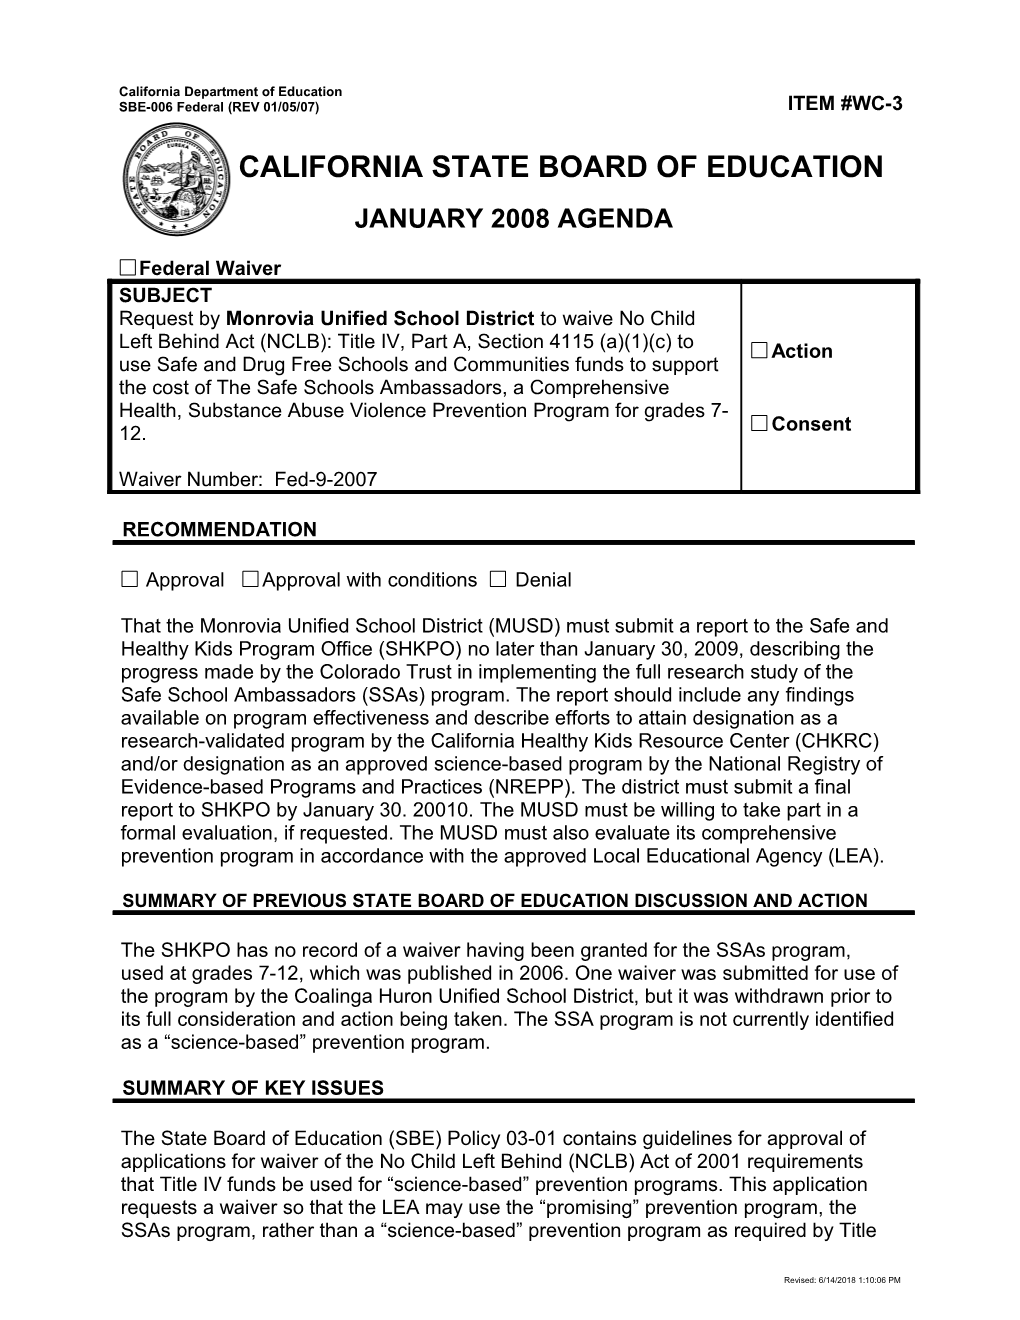 January 2008 Waiver Item WC3 - Meeting Agendas (CA State Board of Education)